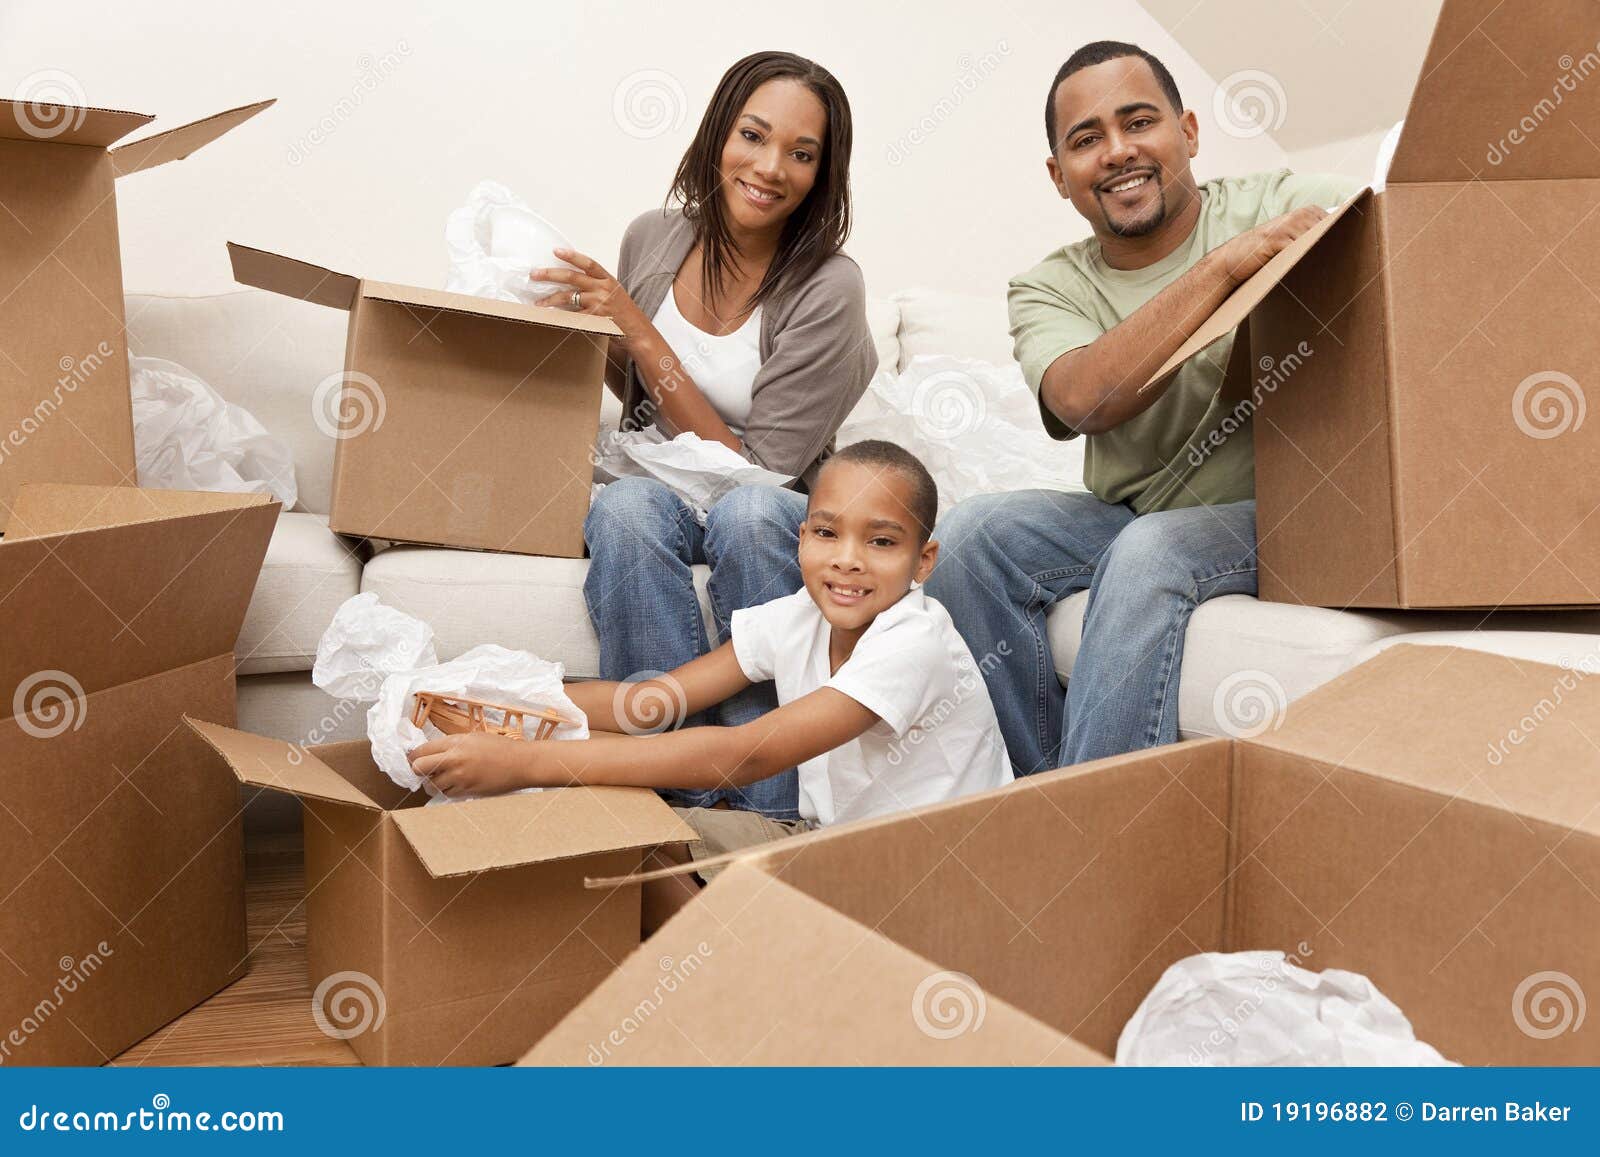 african american family with boxes moving home